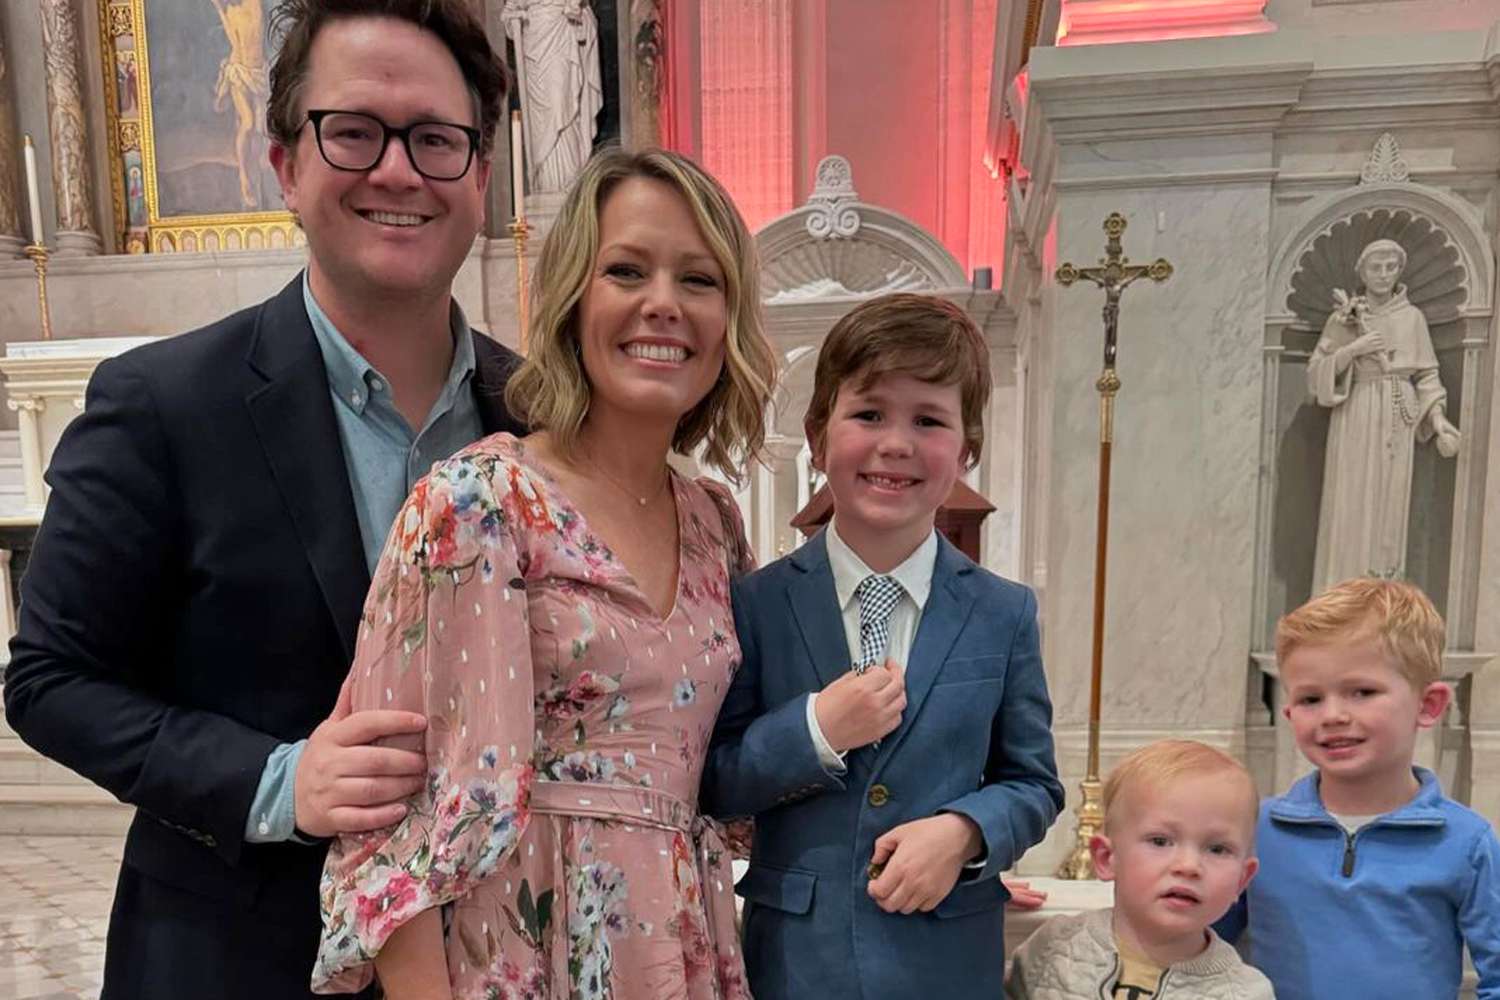 Dylan Dreyer Celebrates Mother's Day with Husband Brian and Their Three Sons: 'What a Special Weekend'